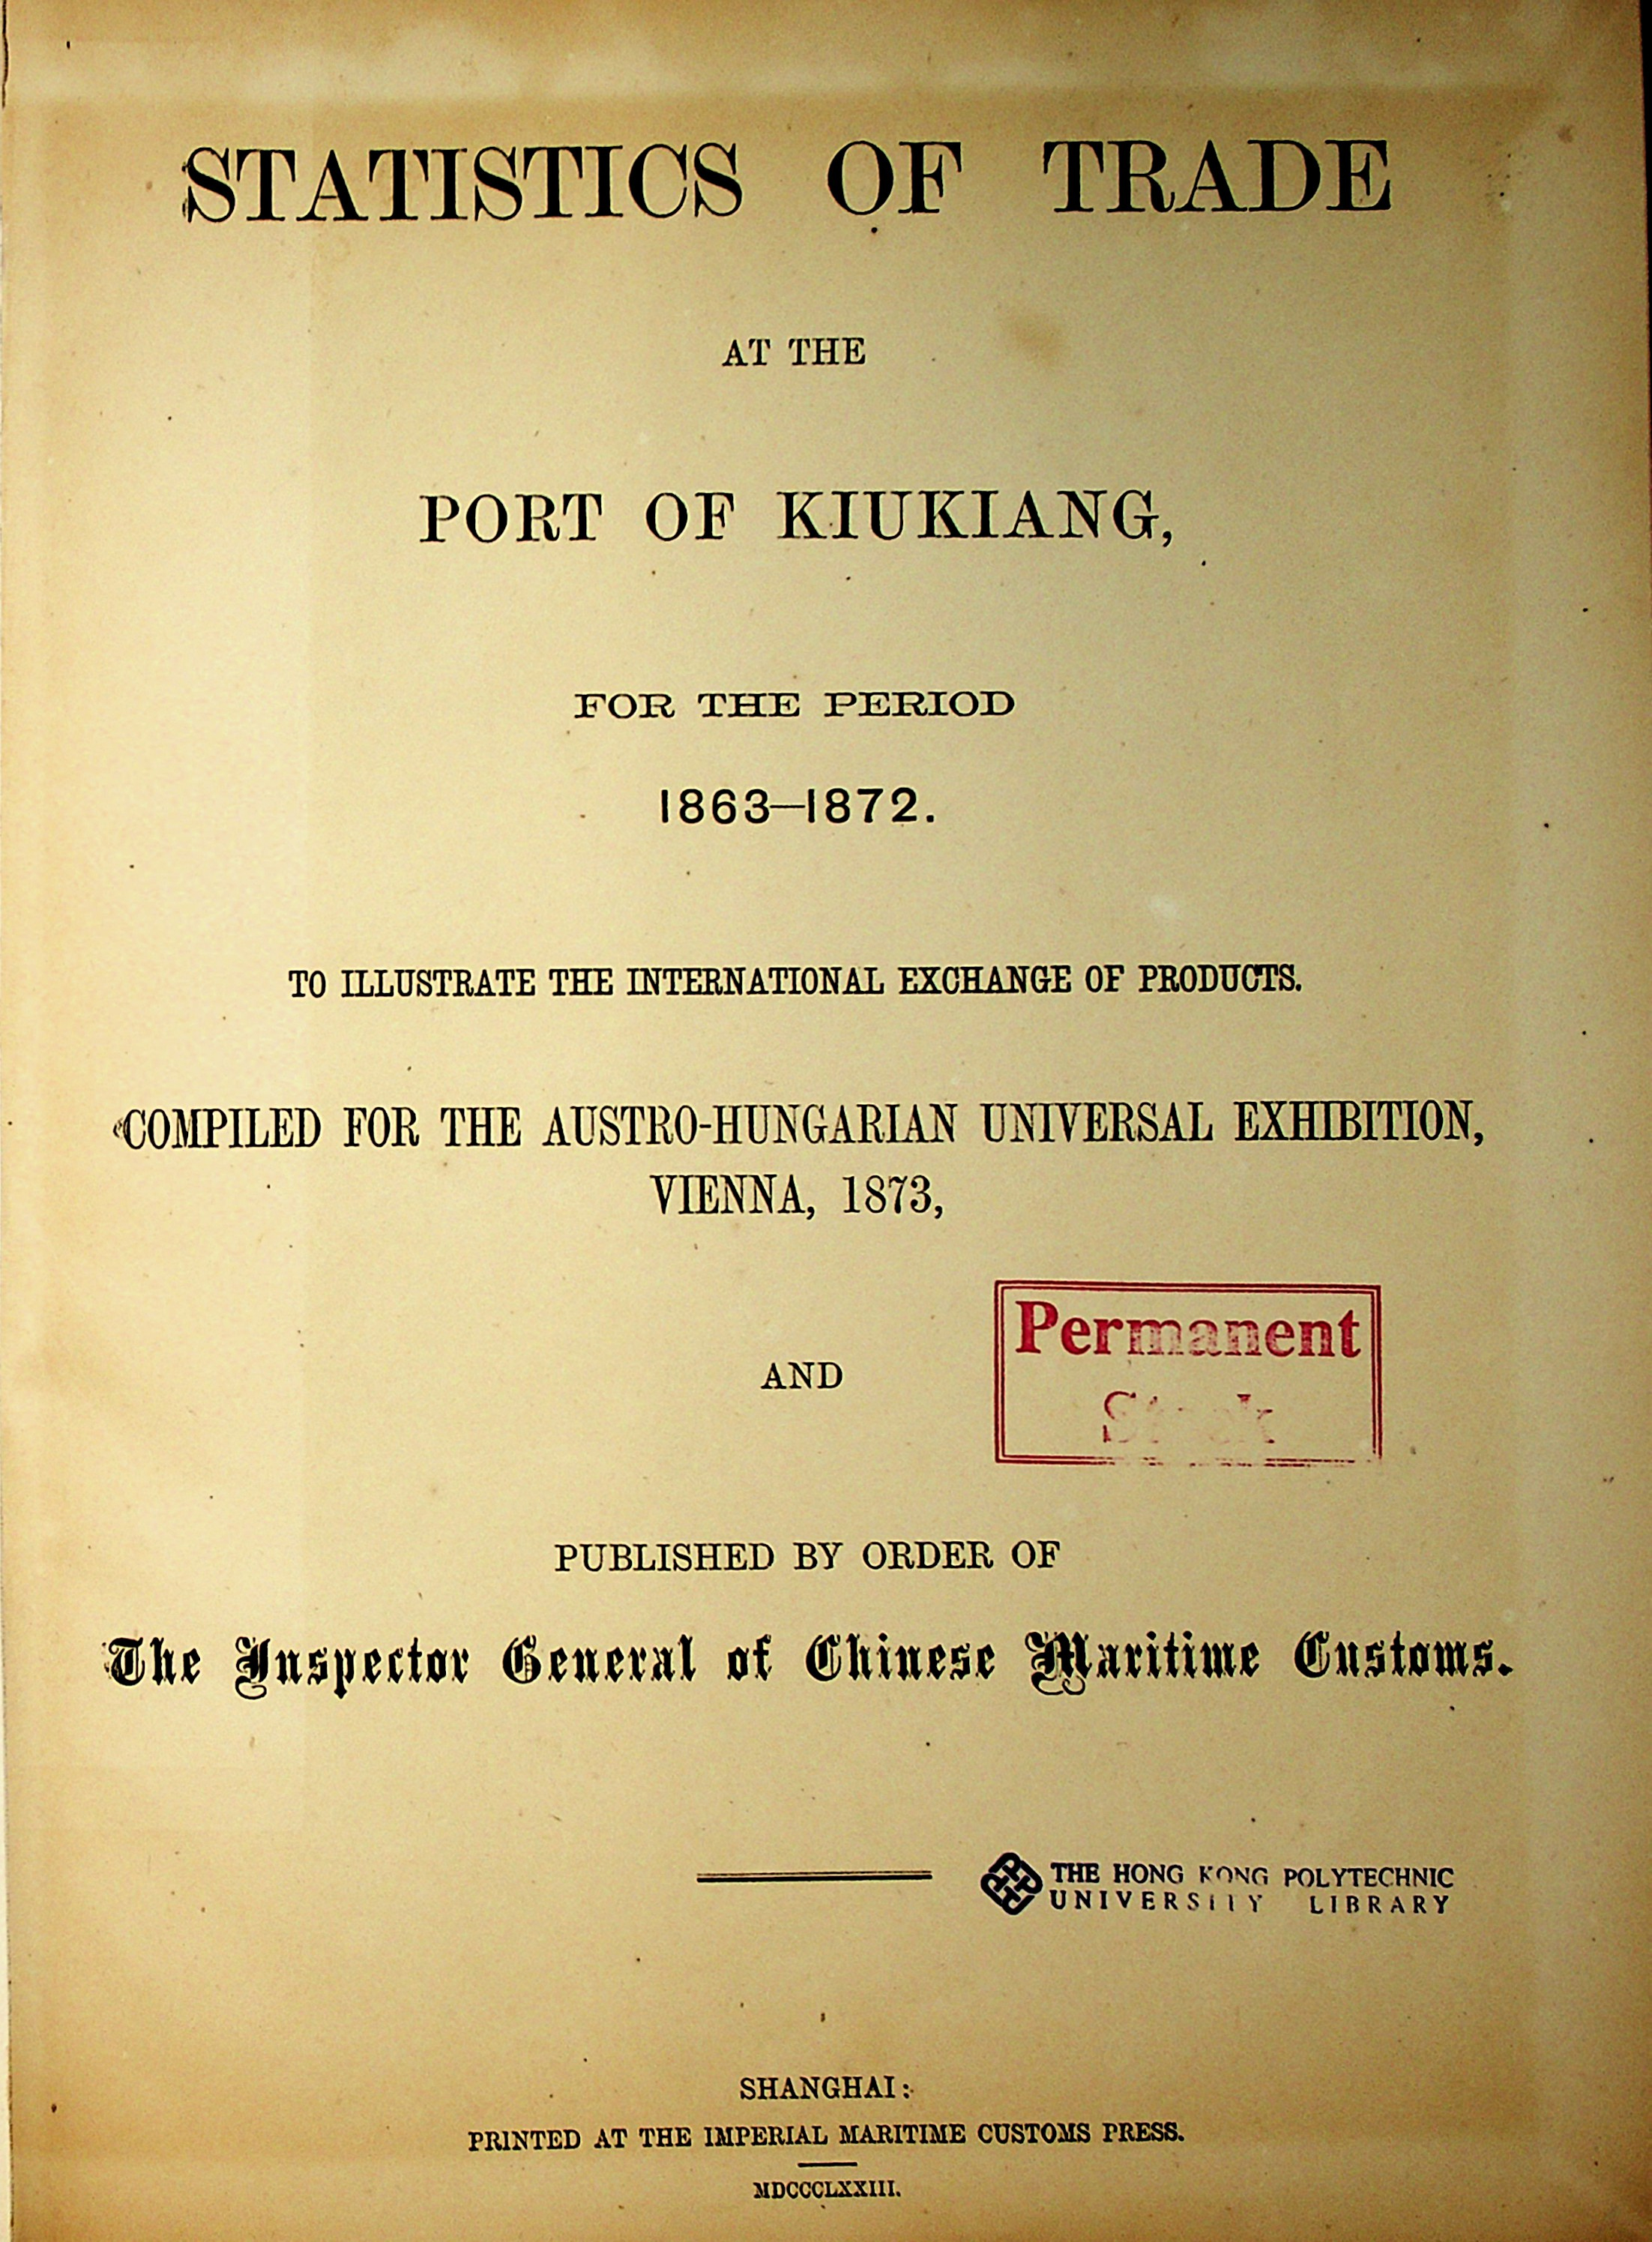 Statistics of trade at the port of Kiukiang, for the period 1863-1872